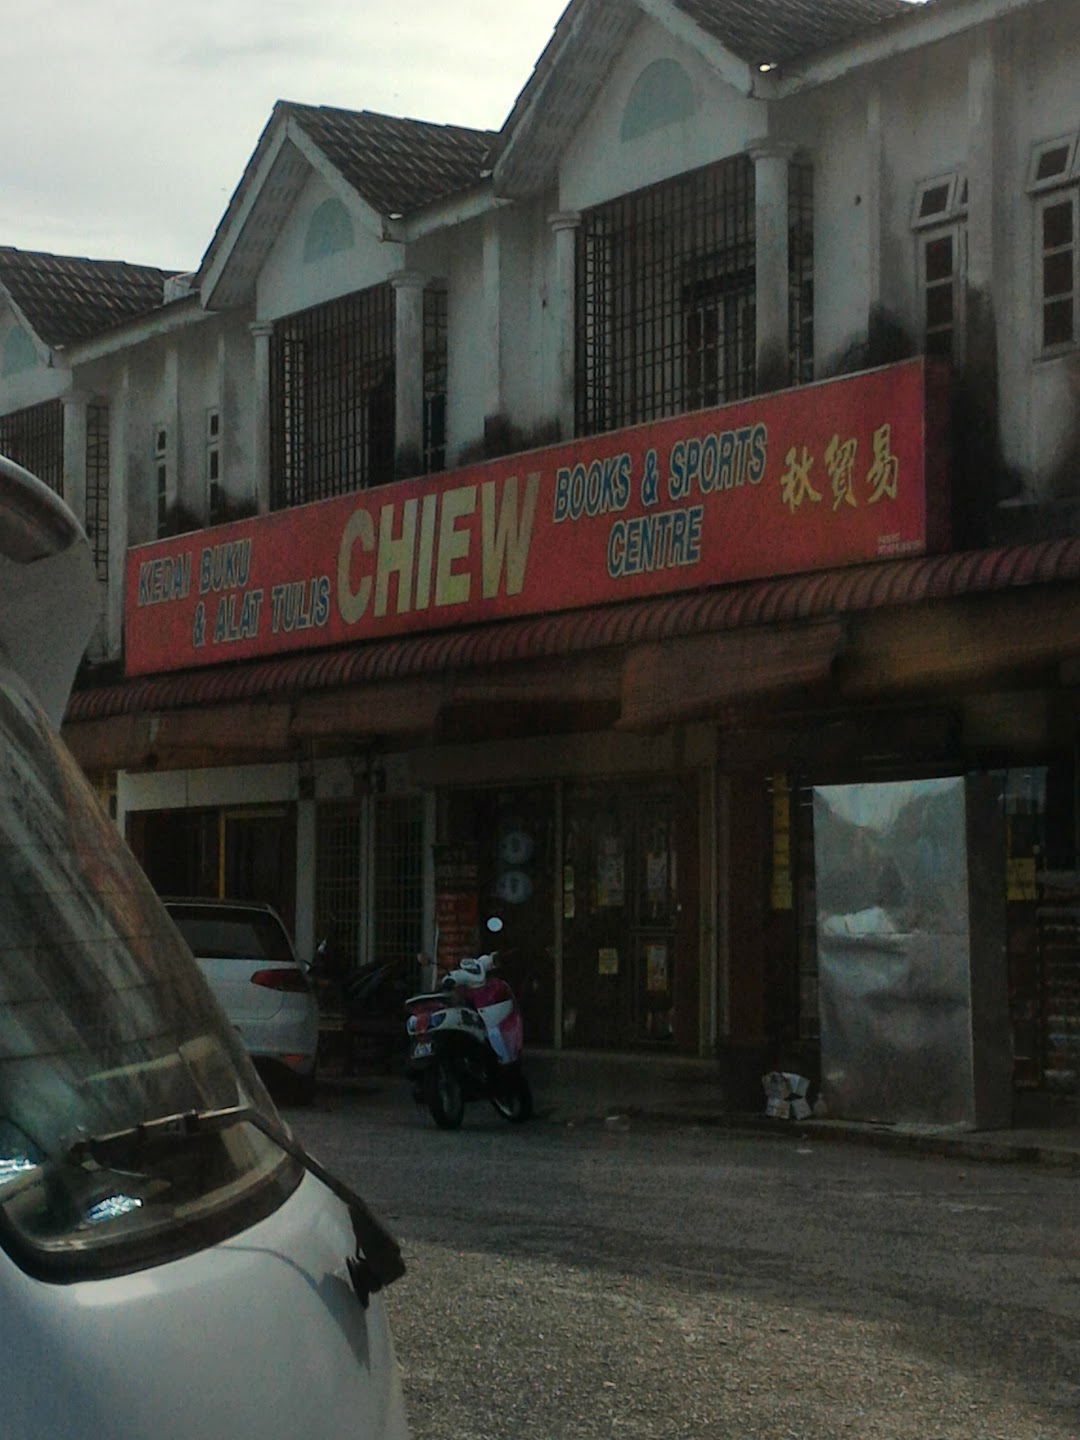 Chiew Books & Sports Centre